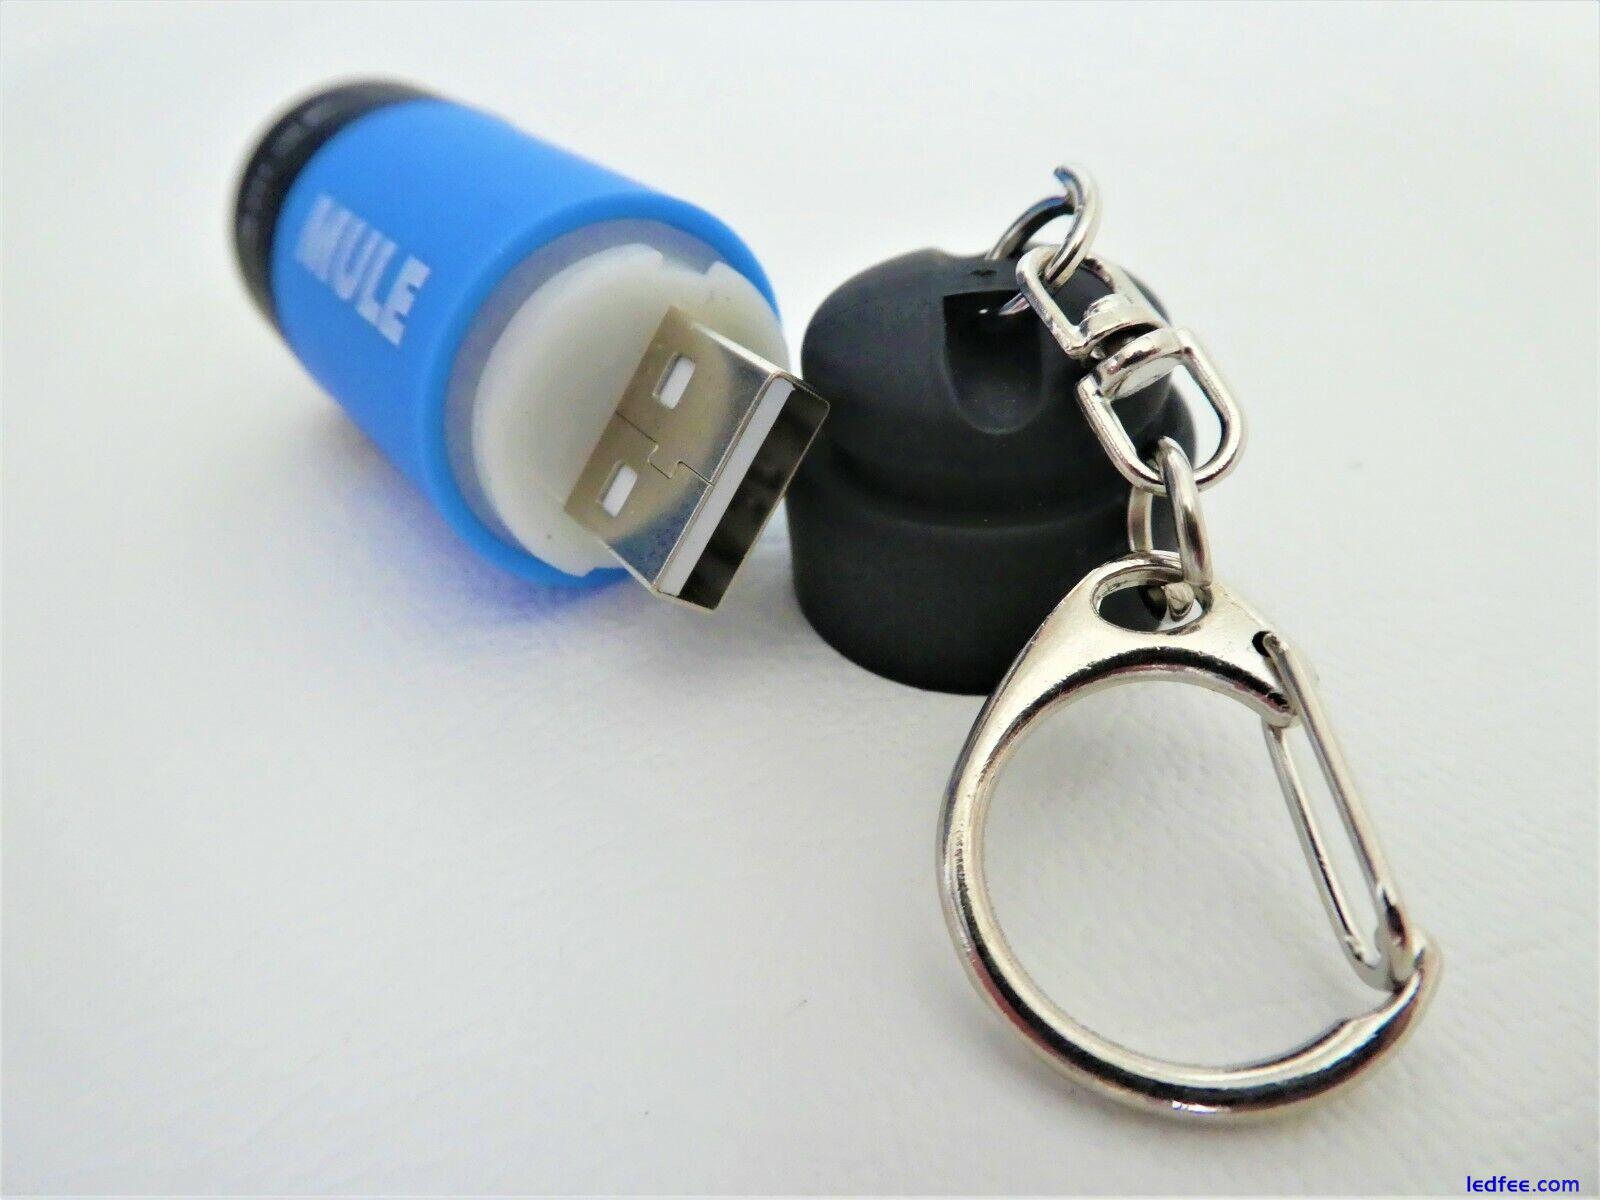 MULE Blue USB Rechargeable water resistant inspection torch key-ring EDC 0 